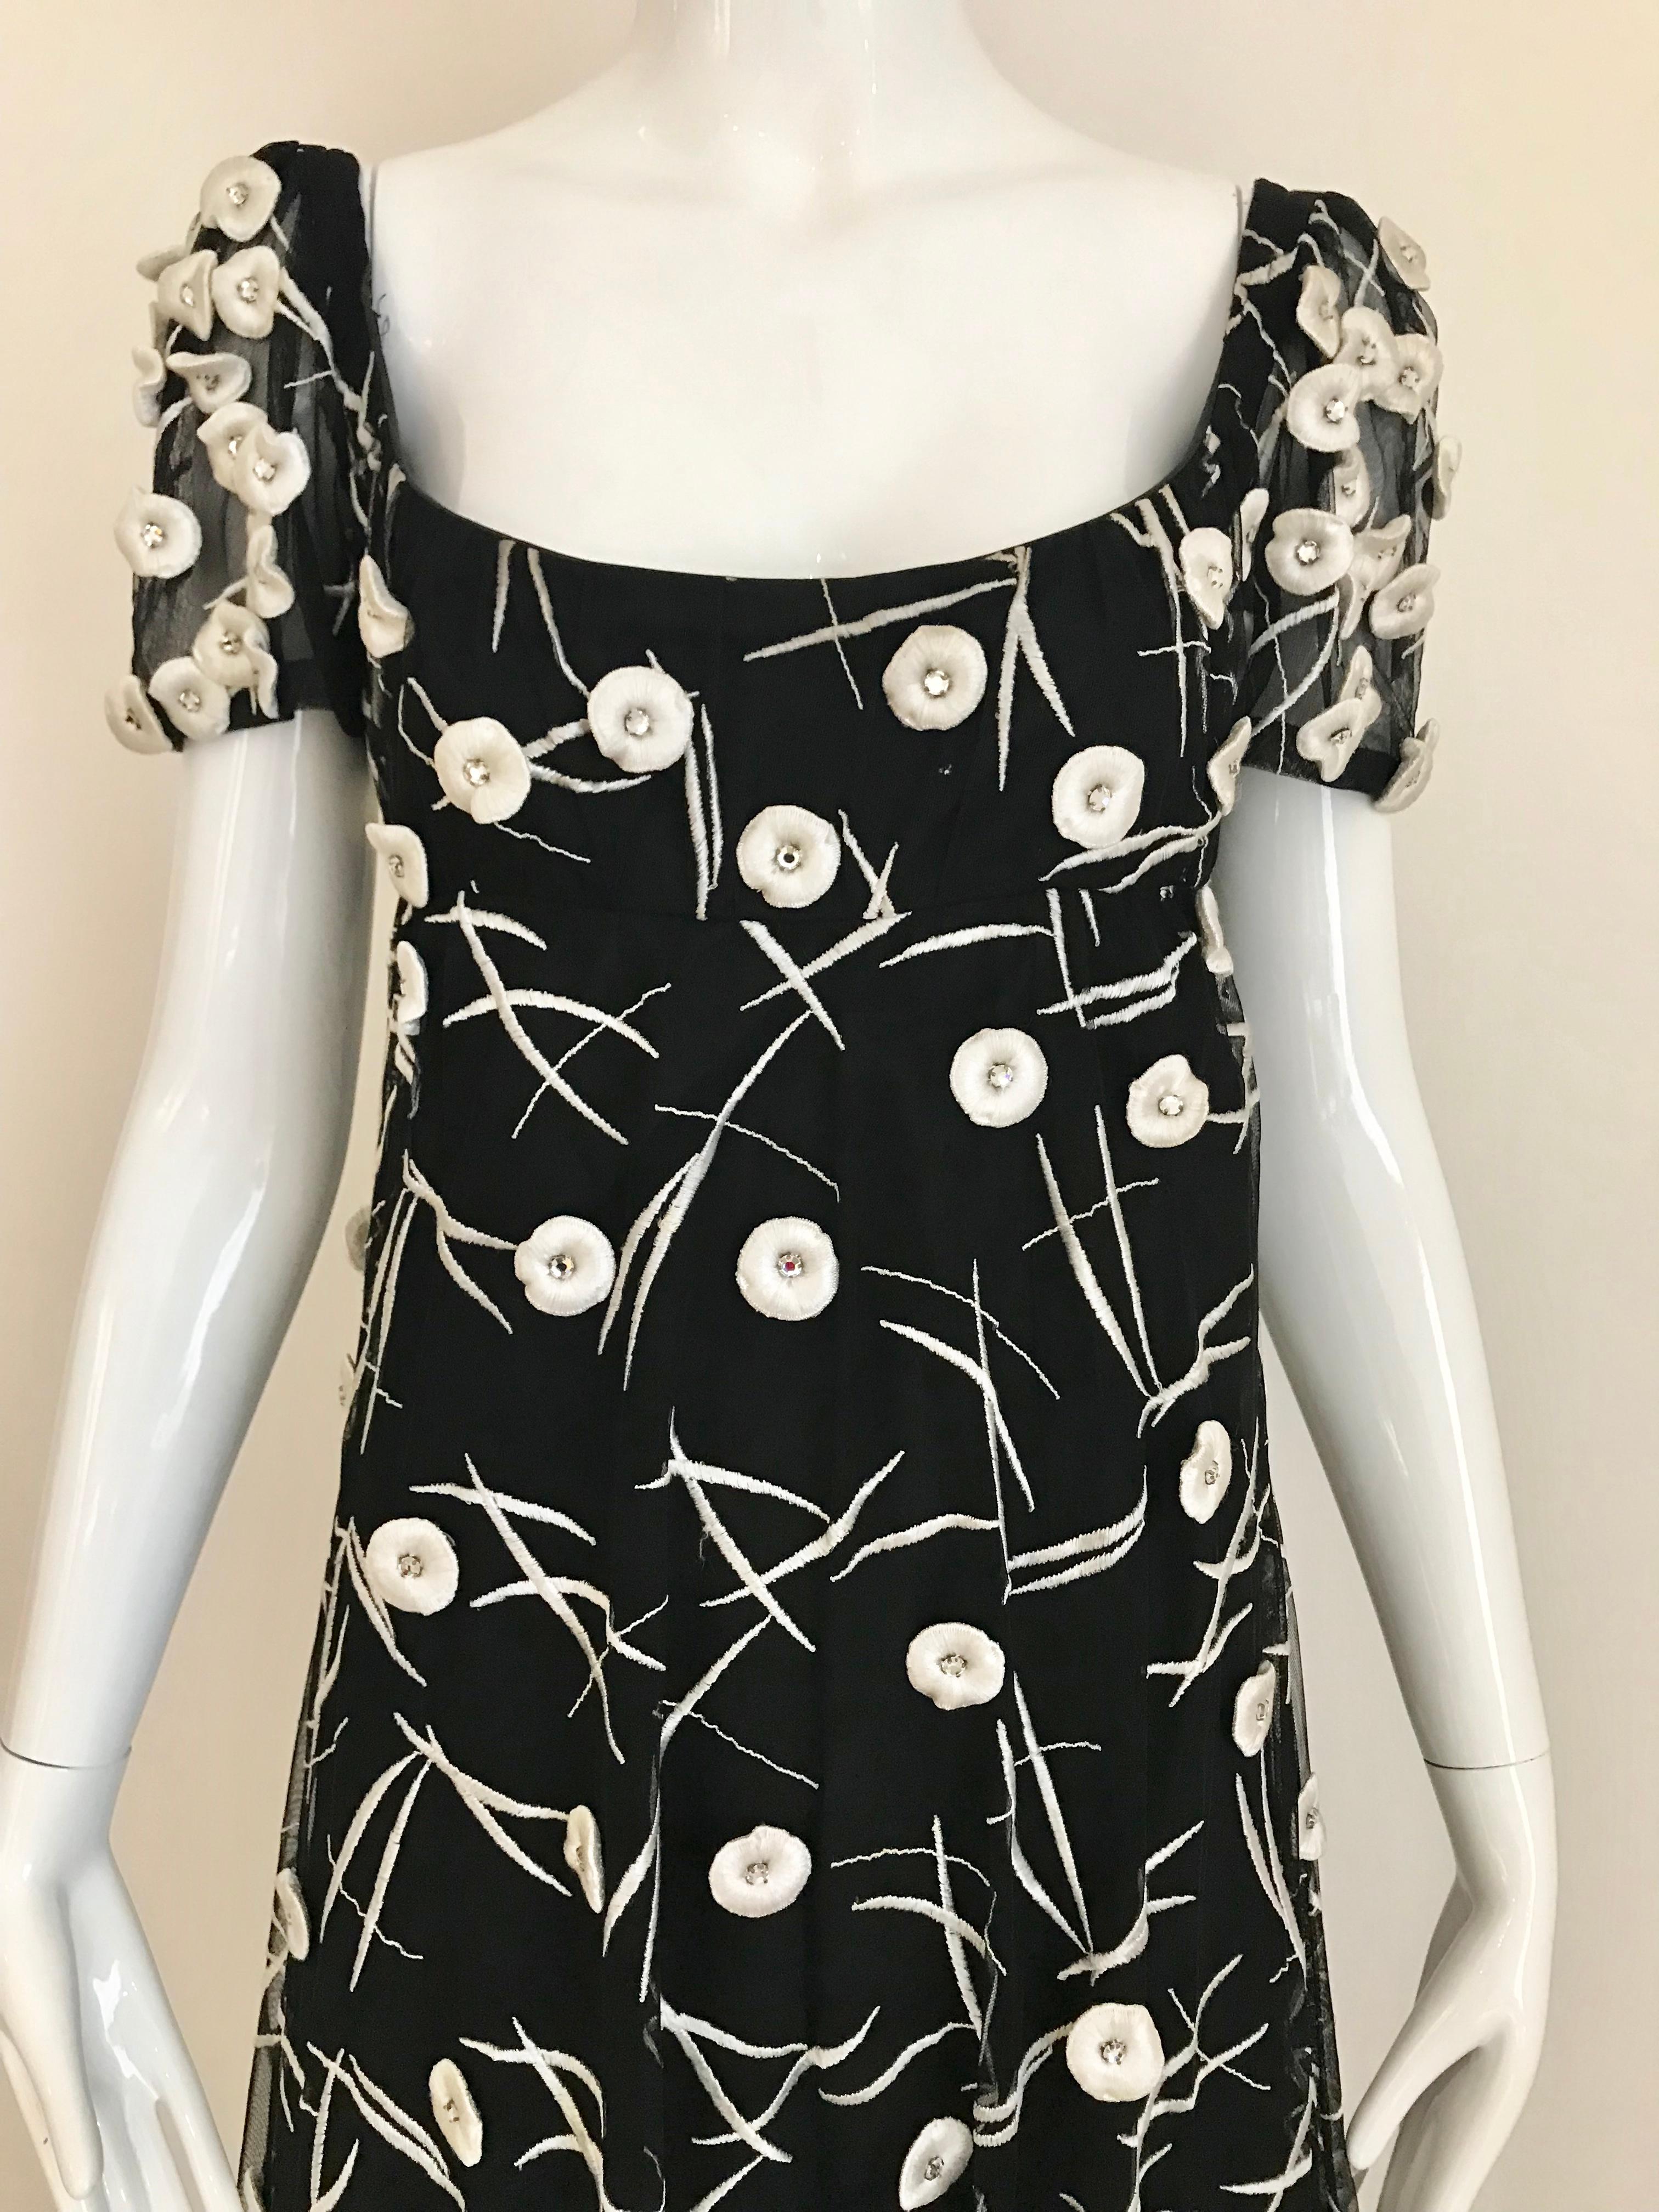 Beautiful 1960s Hardy Amies Black net gown with white circle appliqué with rhinestones. Scoop neck and empire waist.
Size: 6 ( see measurement) 
Bust: 36 inches/ Waist: 34 inches/ Hip 38 inches/ dress length: 54 inches